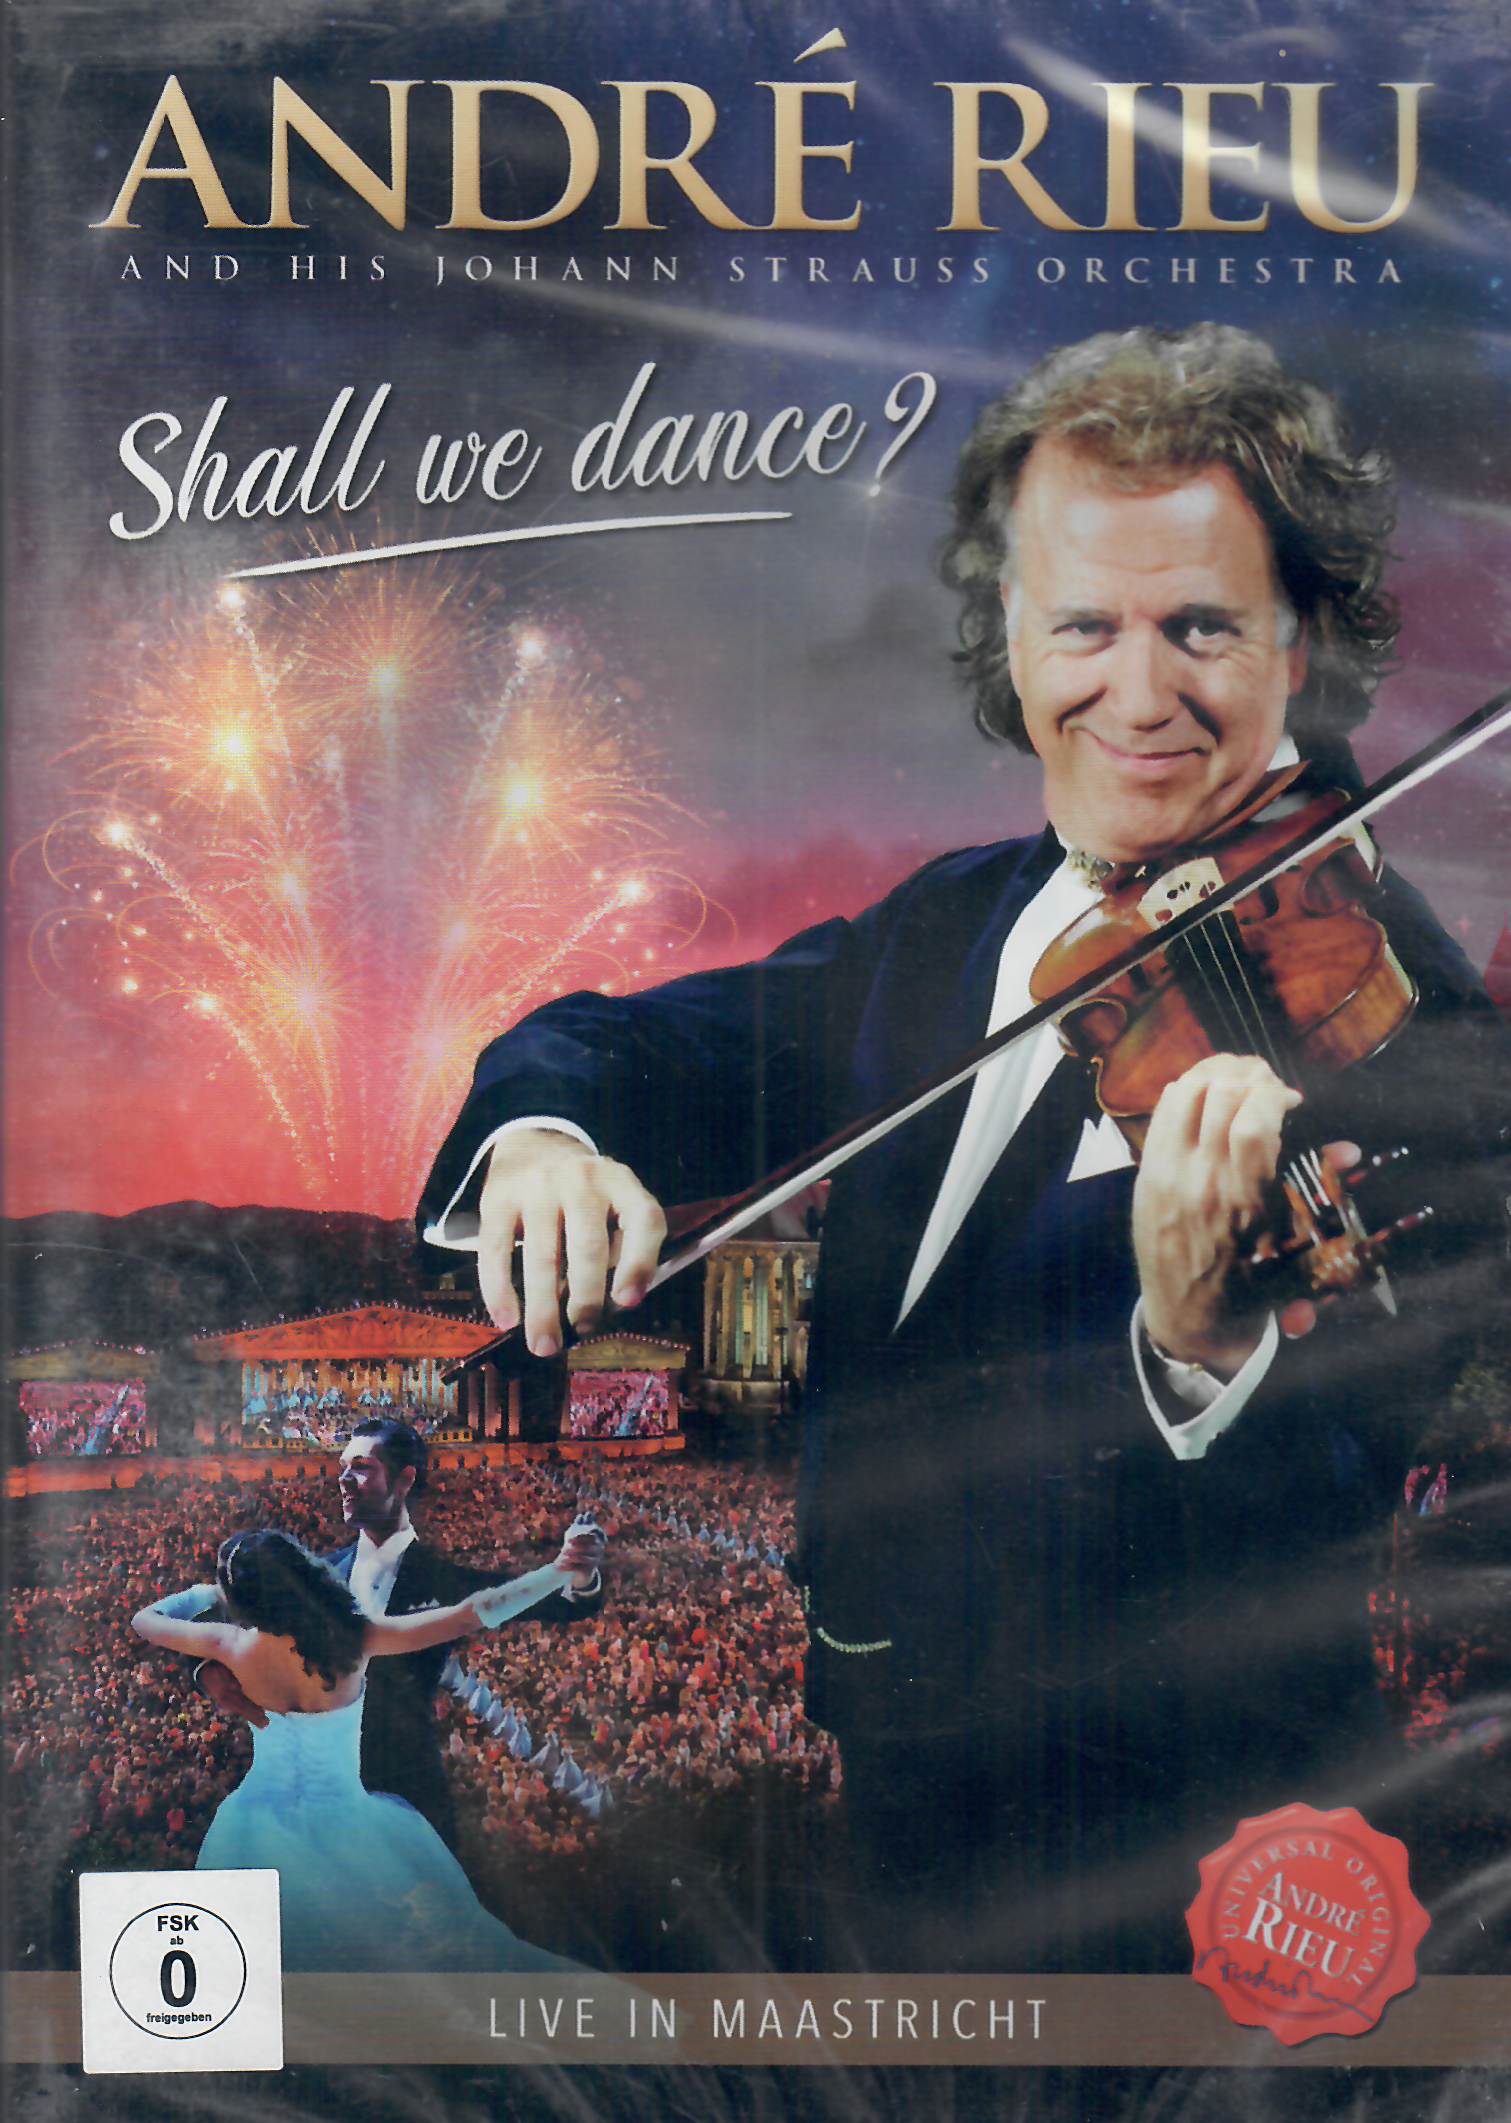 DVD André Rieu - Shall we dance? Live in Maastricht